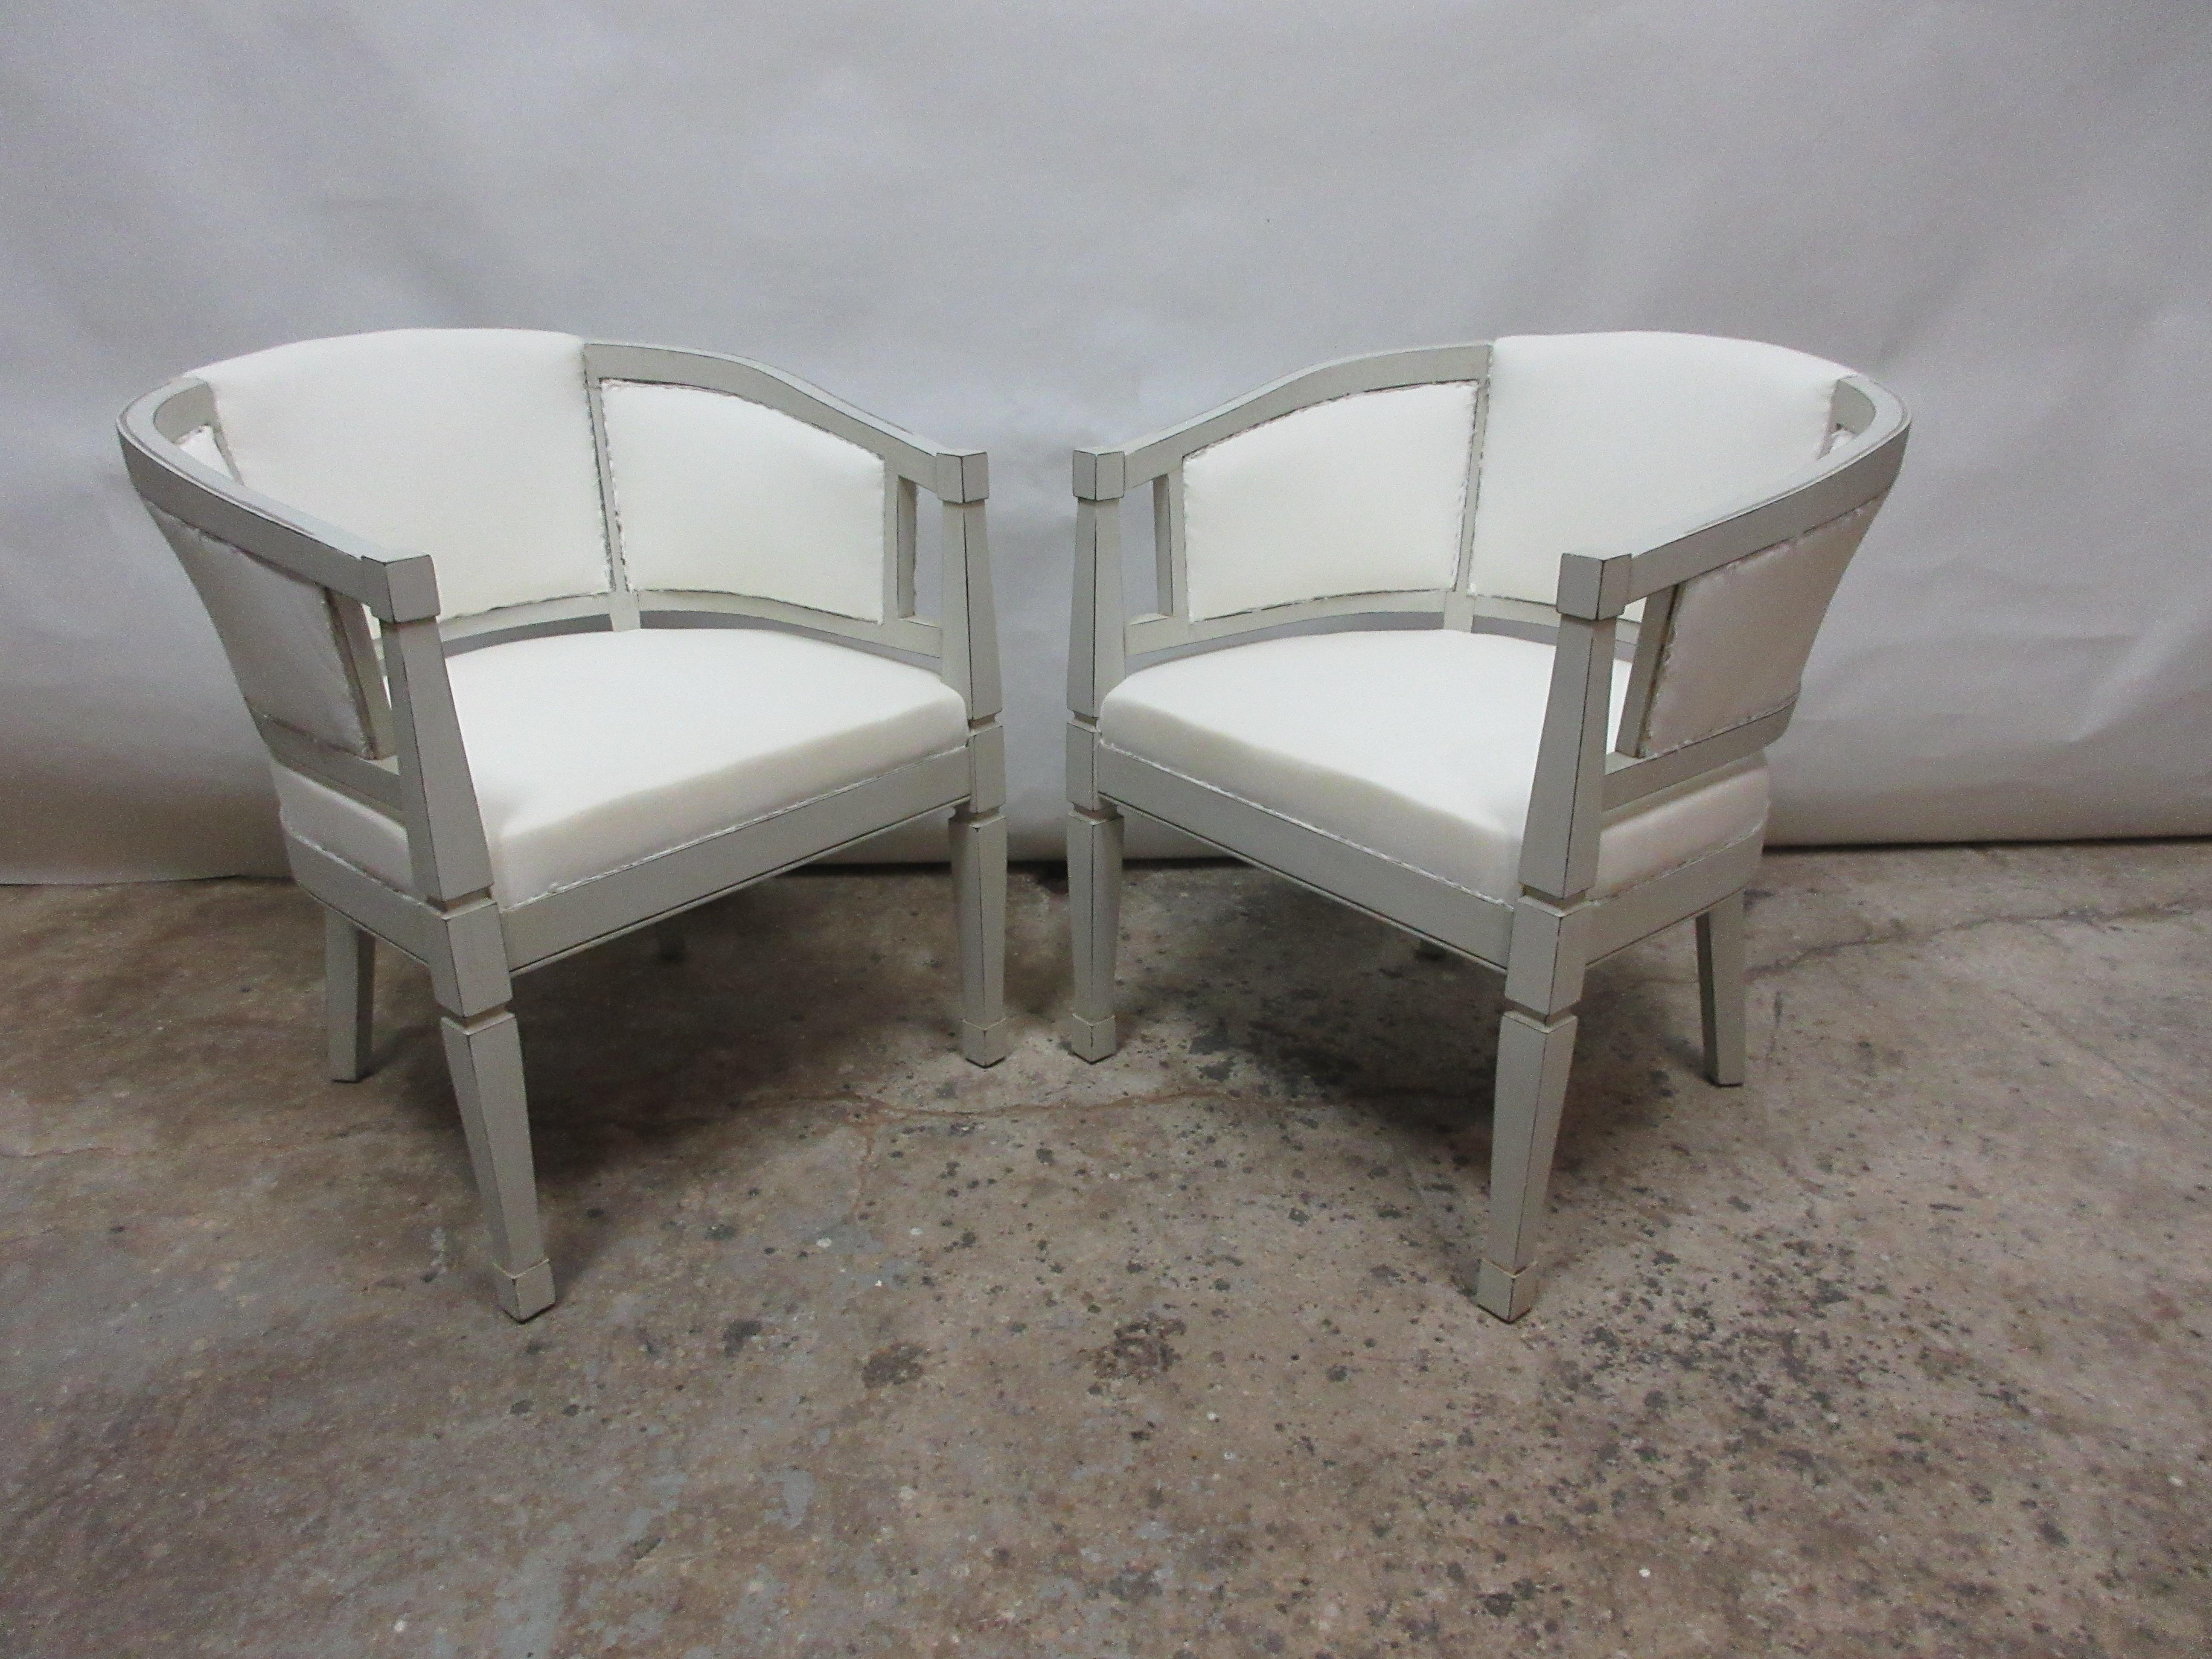 This is a set of 2 Gustavian style Barrel chairs. They have been restored and repainted with milk paints 